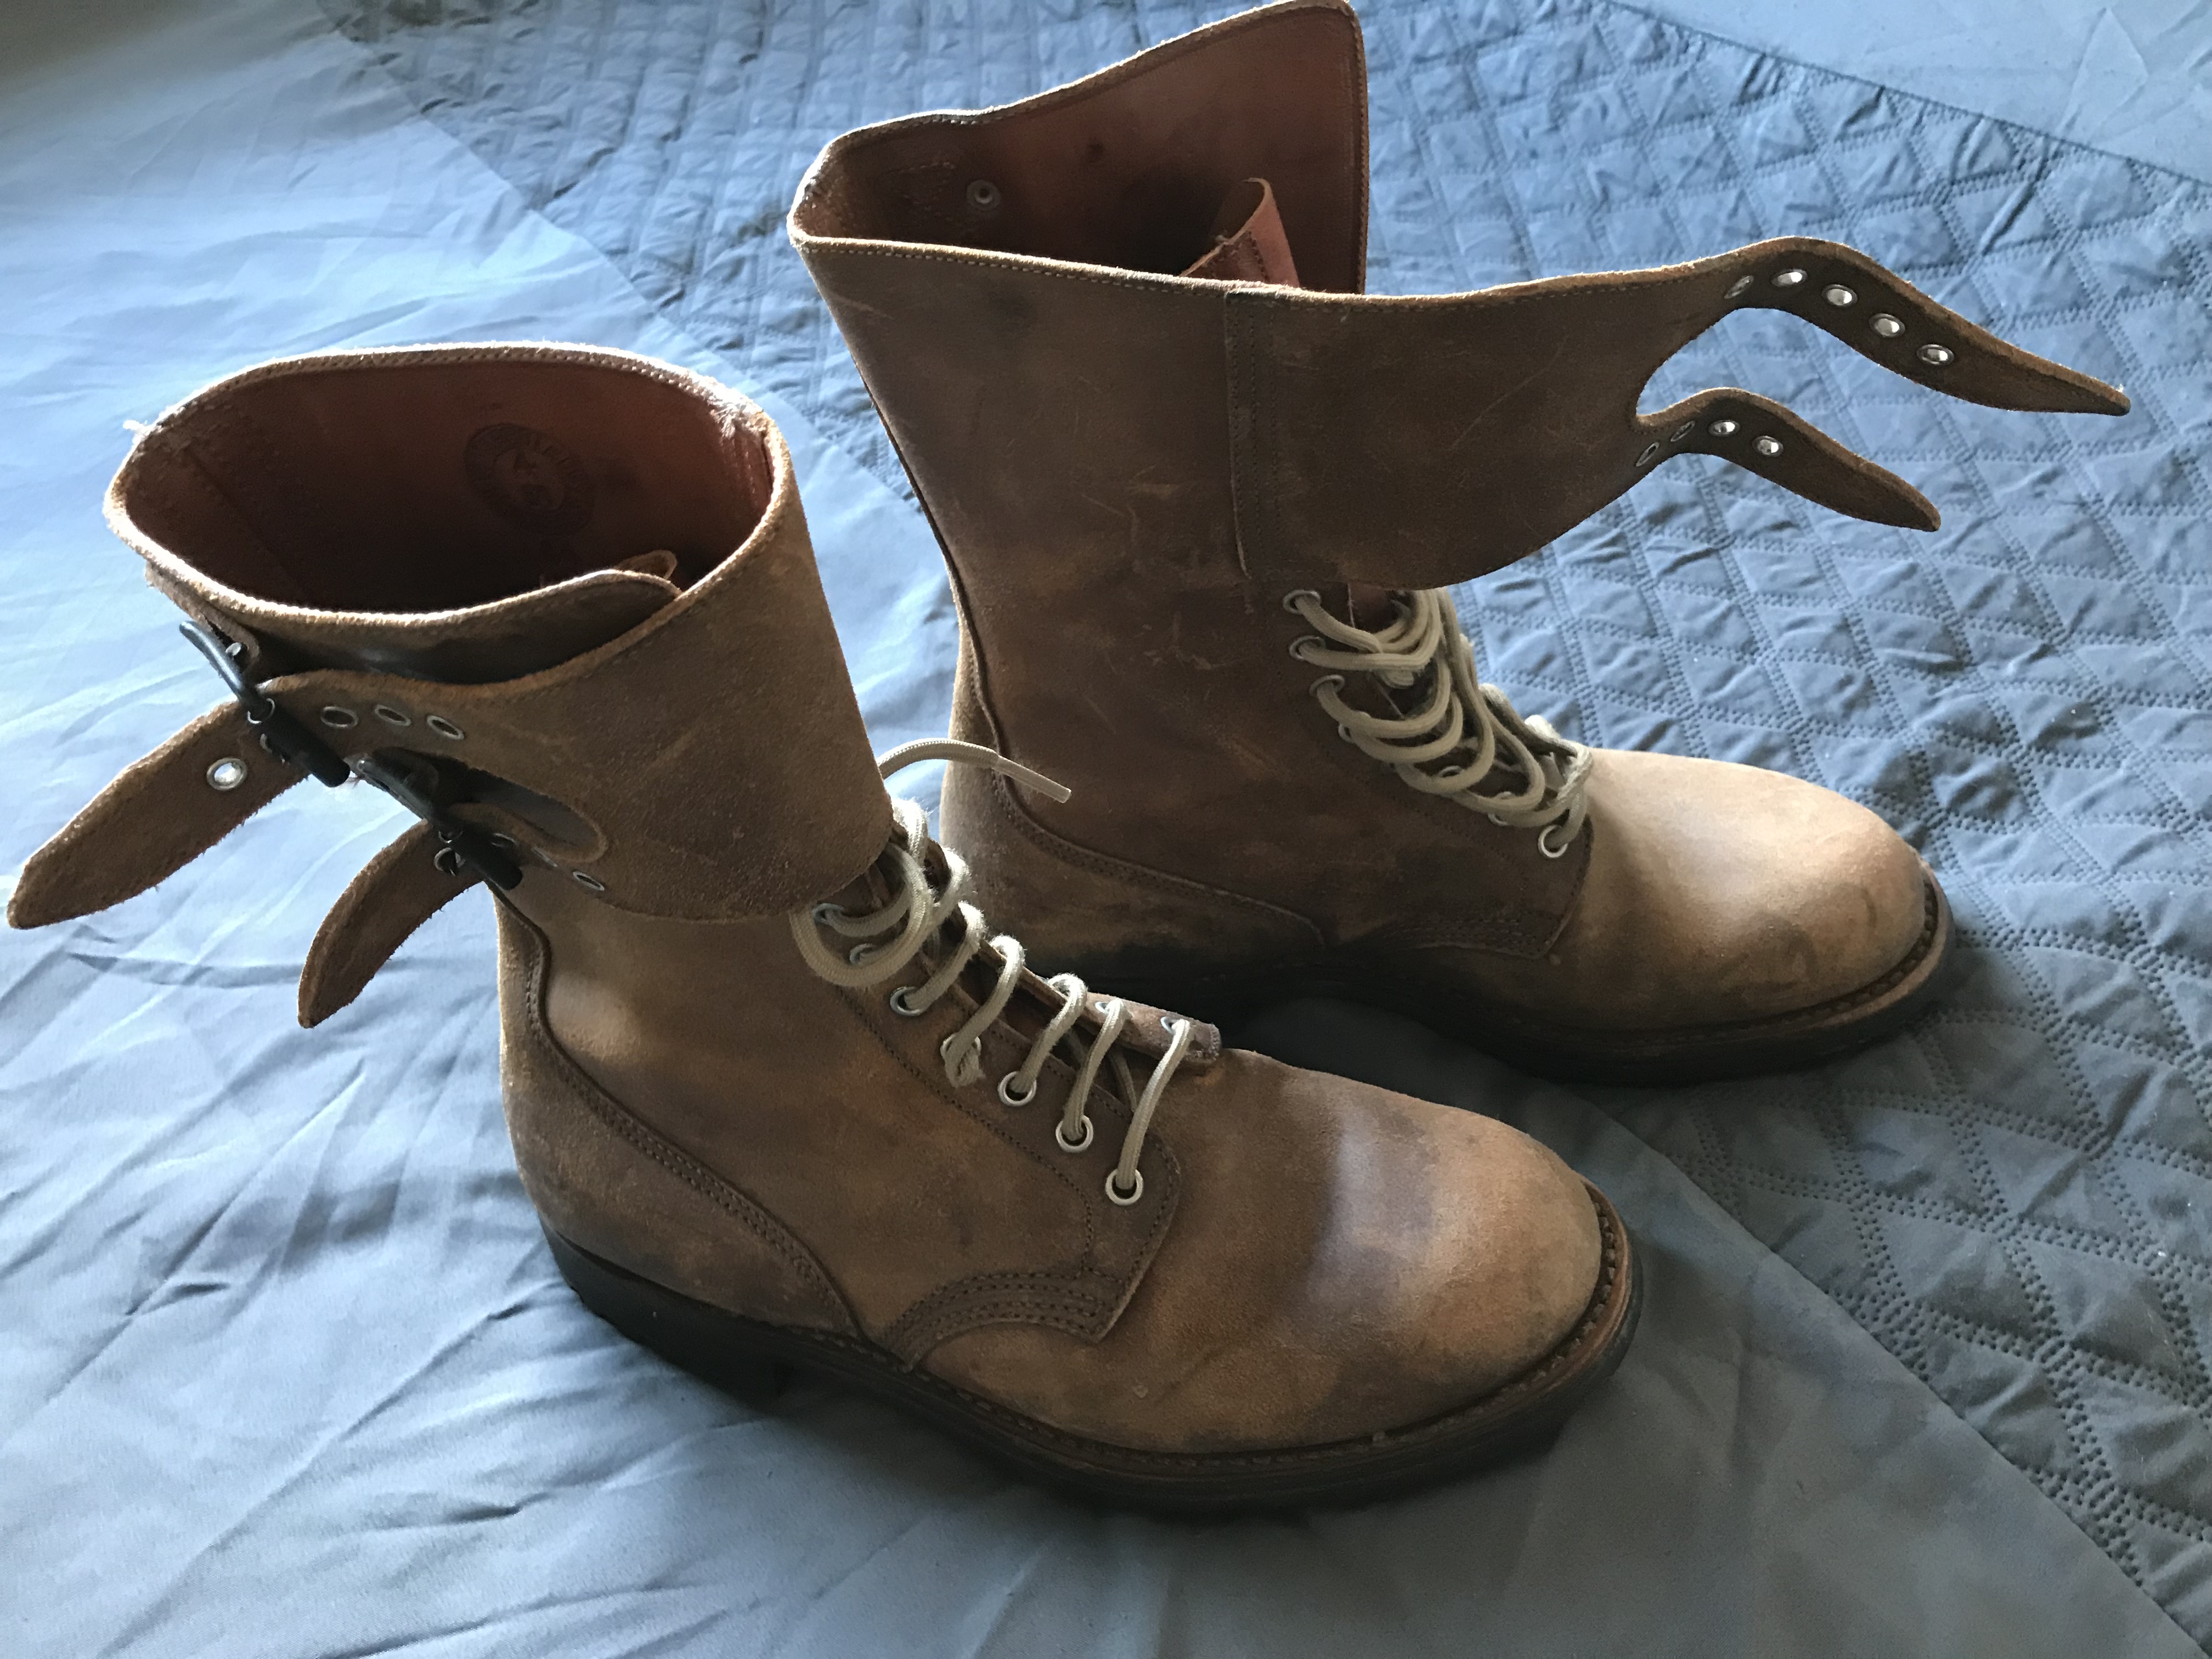 Boots / shoes to wear with your flight jacket s... | Page 21 | Vintage ...